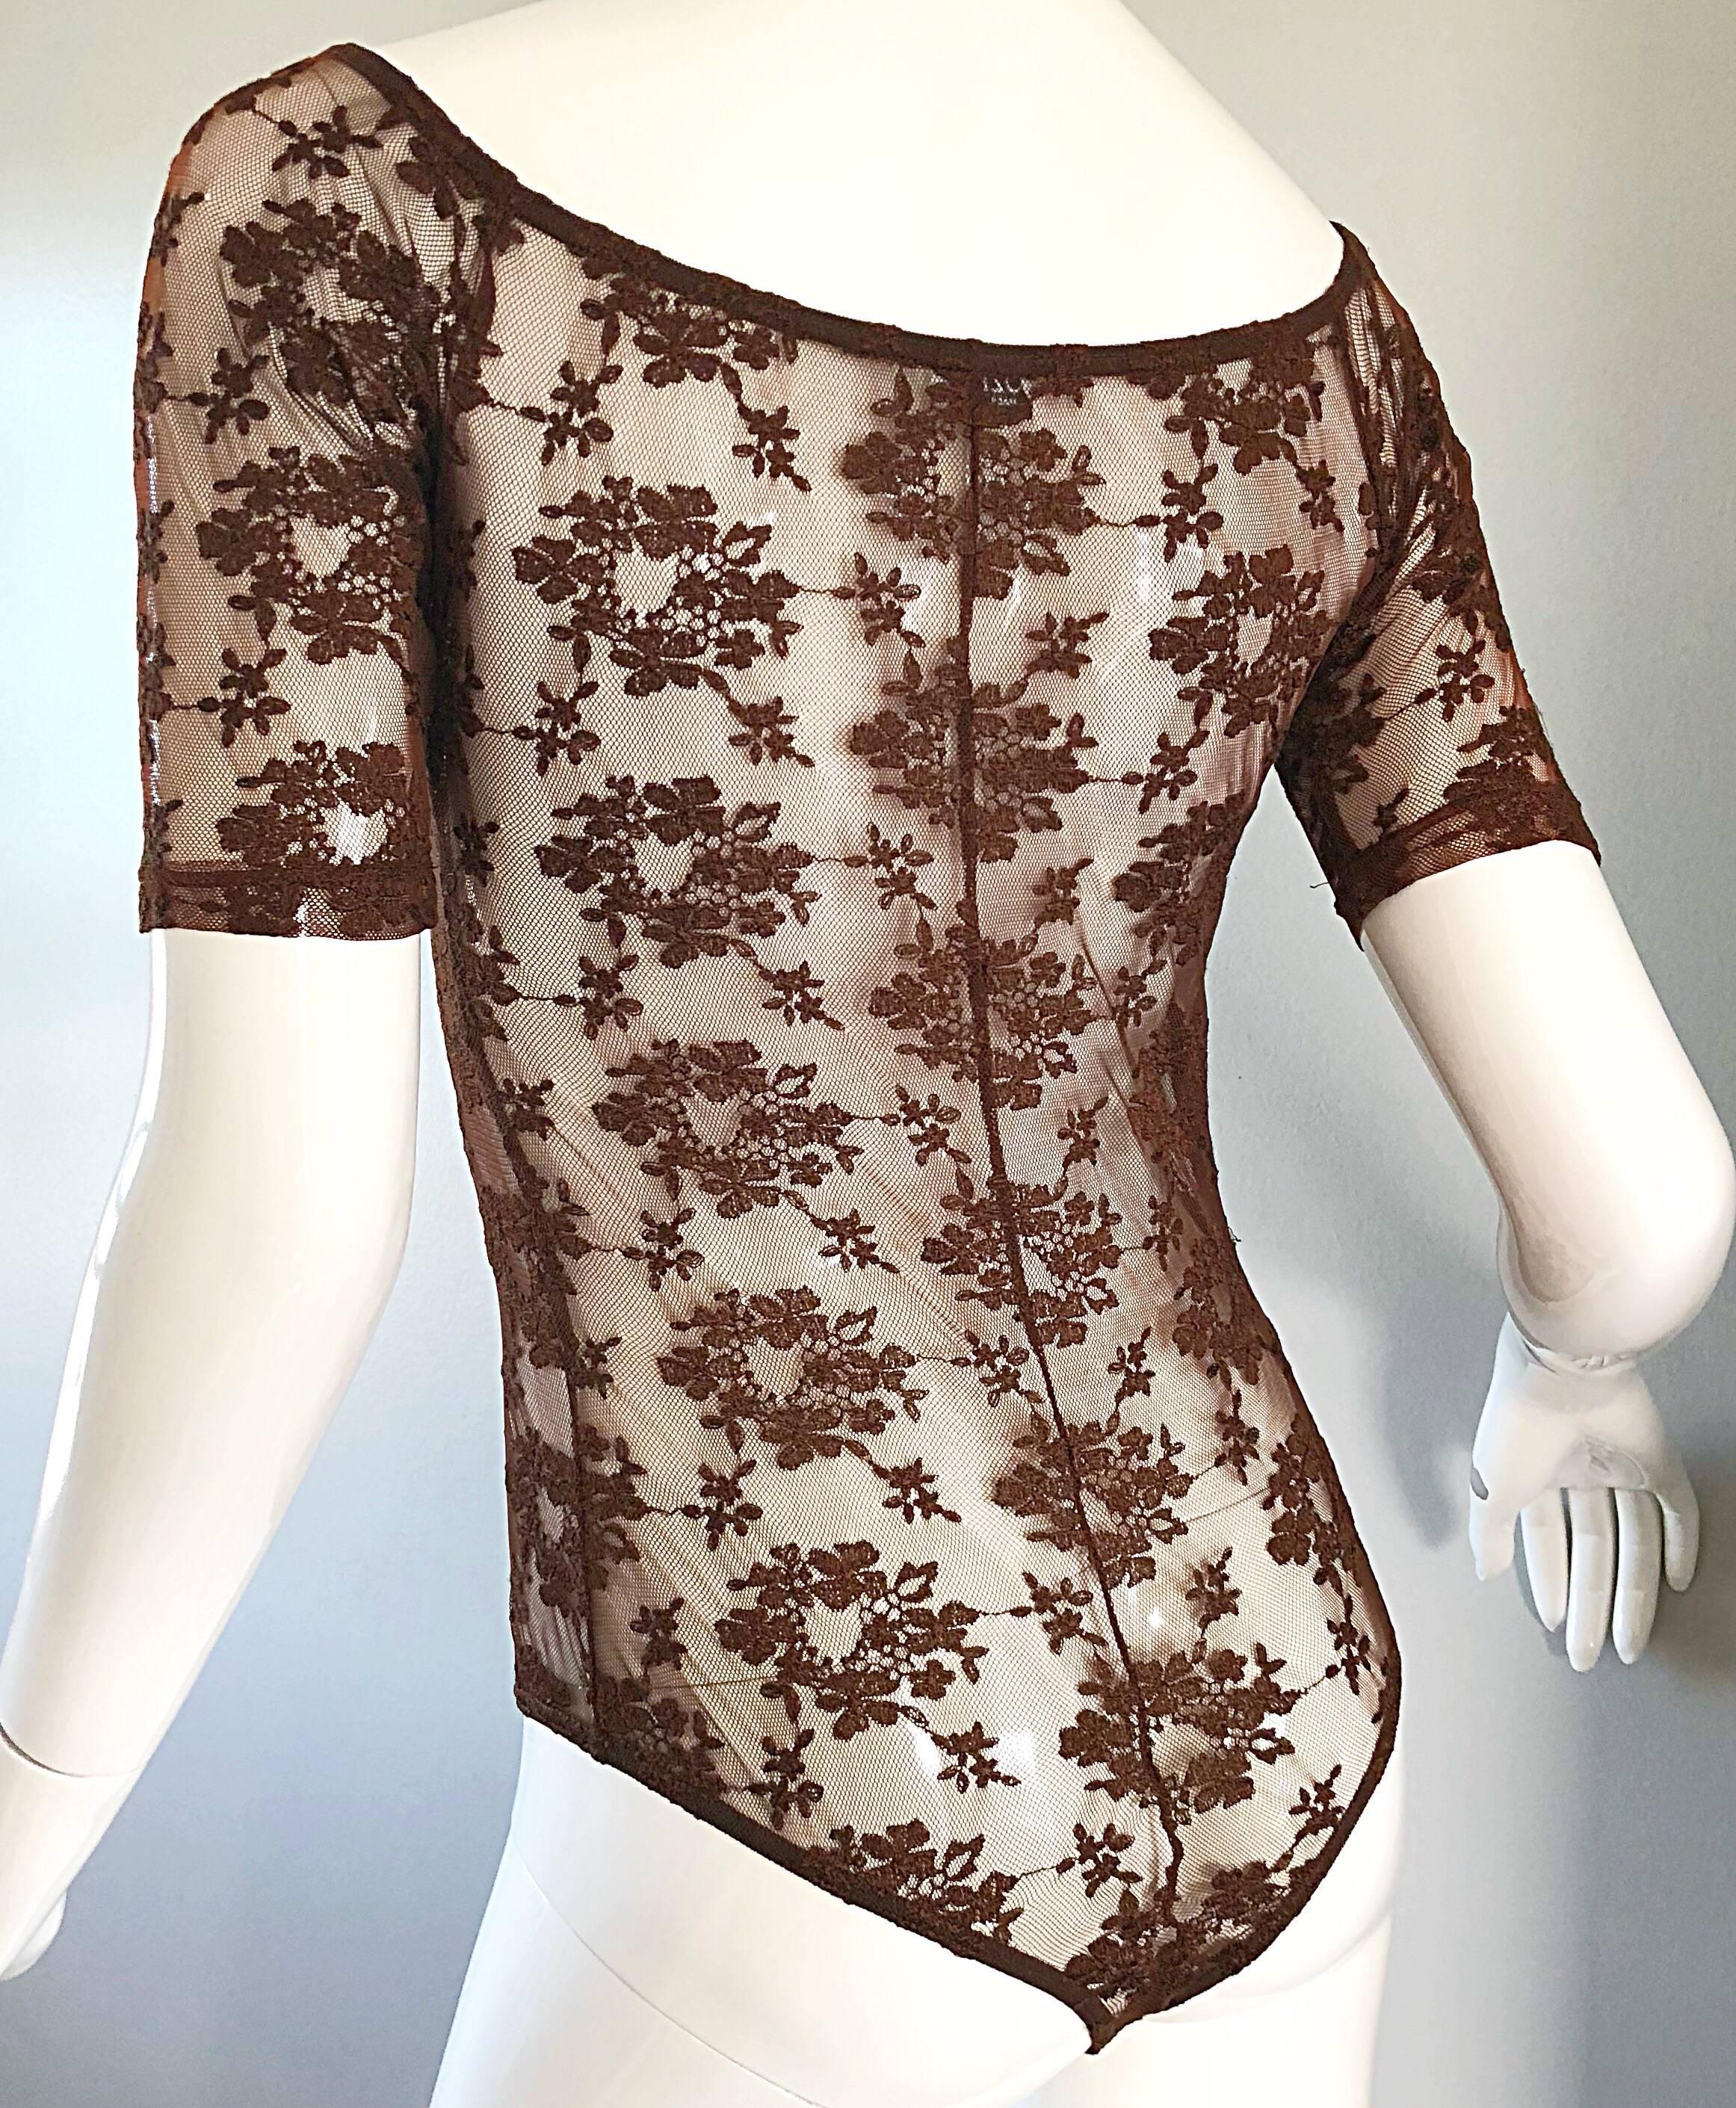 Rare Rifat Ozbek 1990s Choclate Brown French Lace 90s Vintage Bodysuit Top  For Sale 1